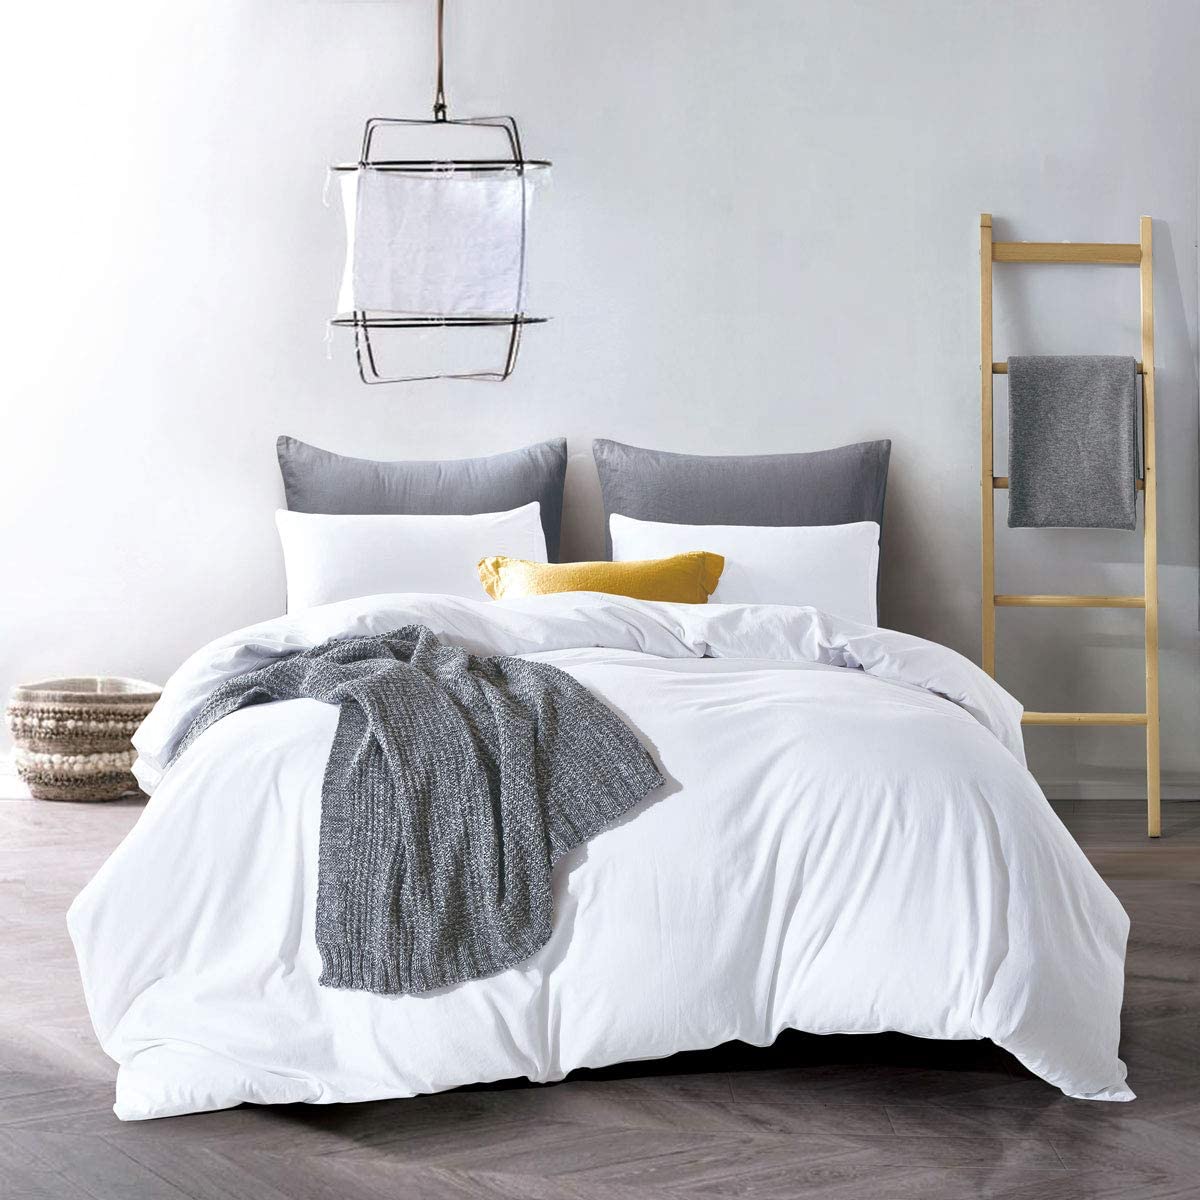 Price:$49.99 ATsense Duvet Cover Queen, 100% Washed Cotton, Bedding Duvet Cover Set, 3-Piece, Ultra Soft and Easy Care, Simple Style Farmhouse Bedding Set (White 7006-4) : Home & Kitchen